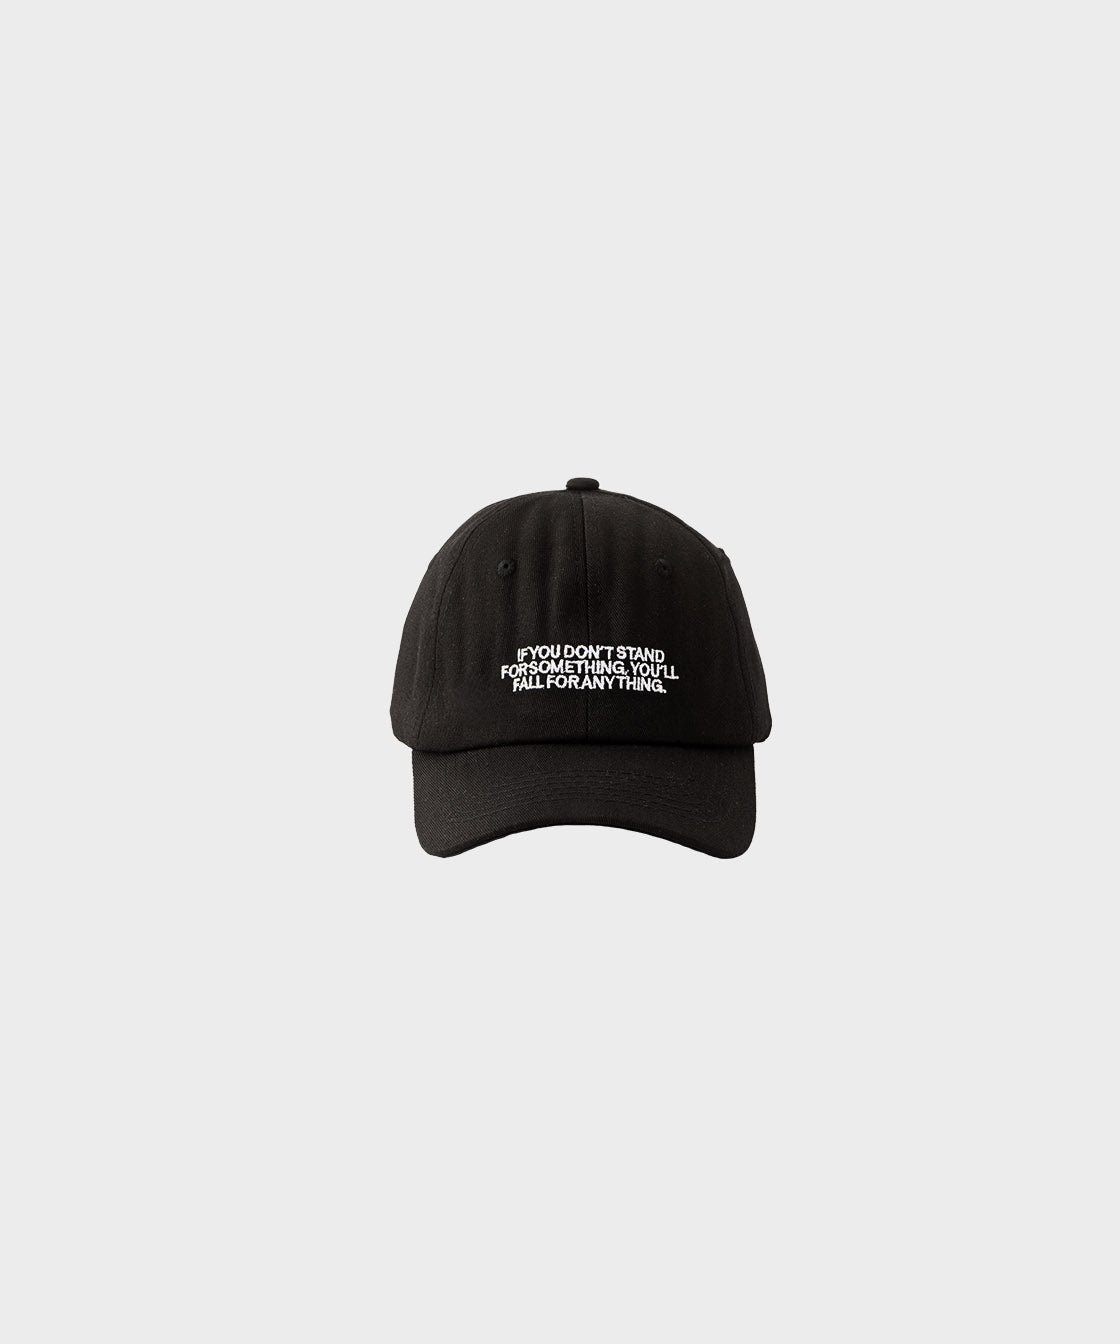 Casquette if you don't stand - noire